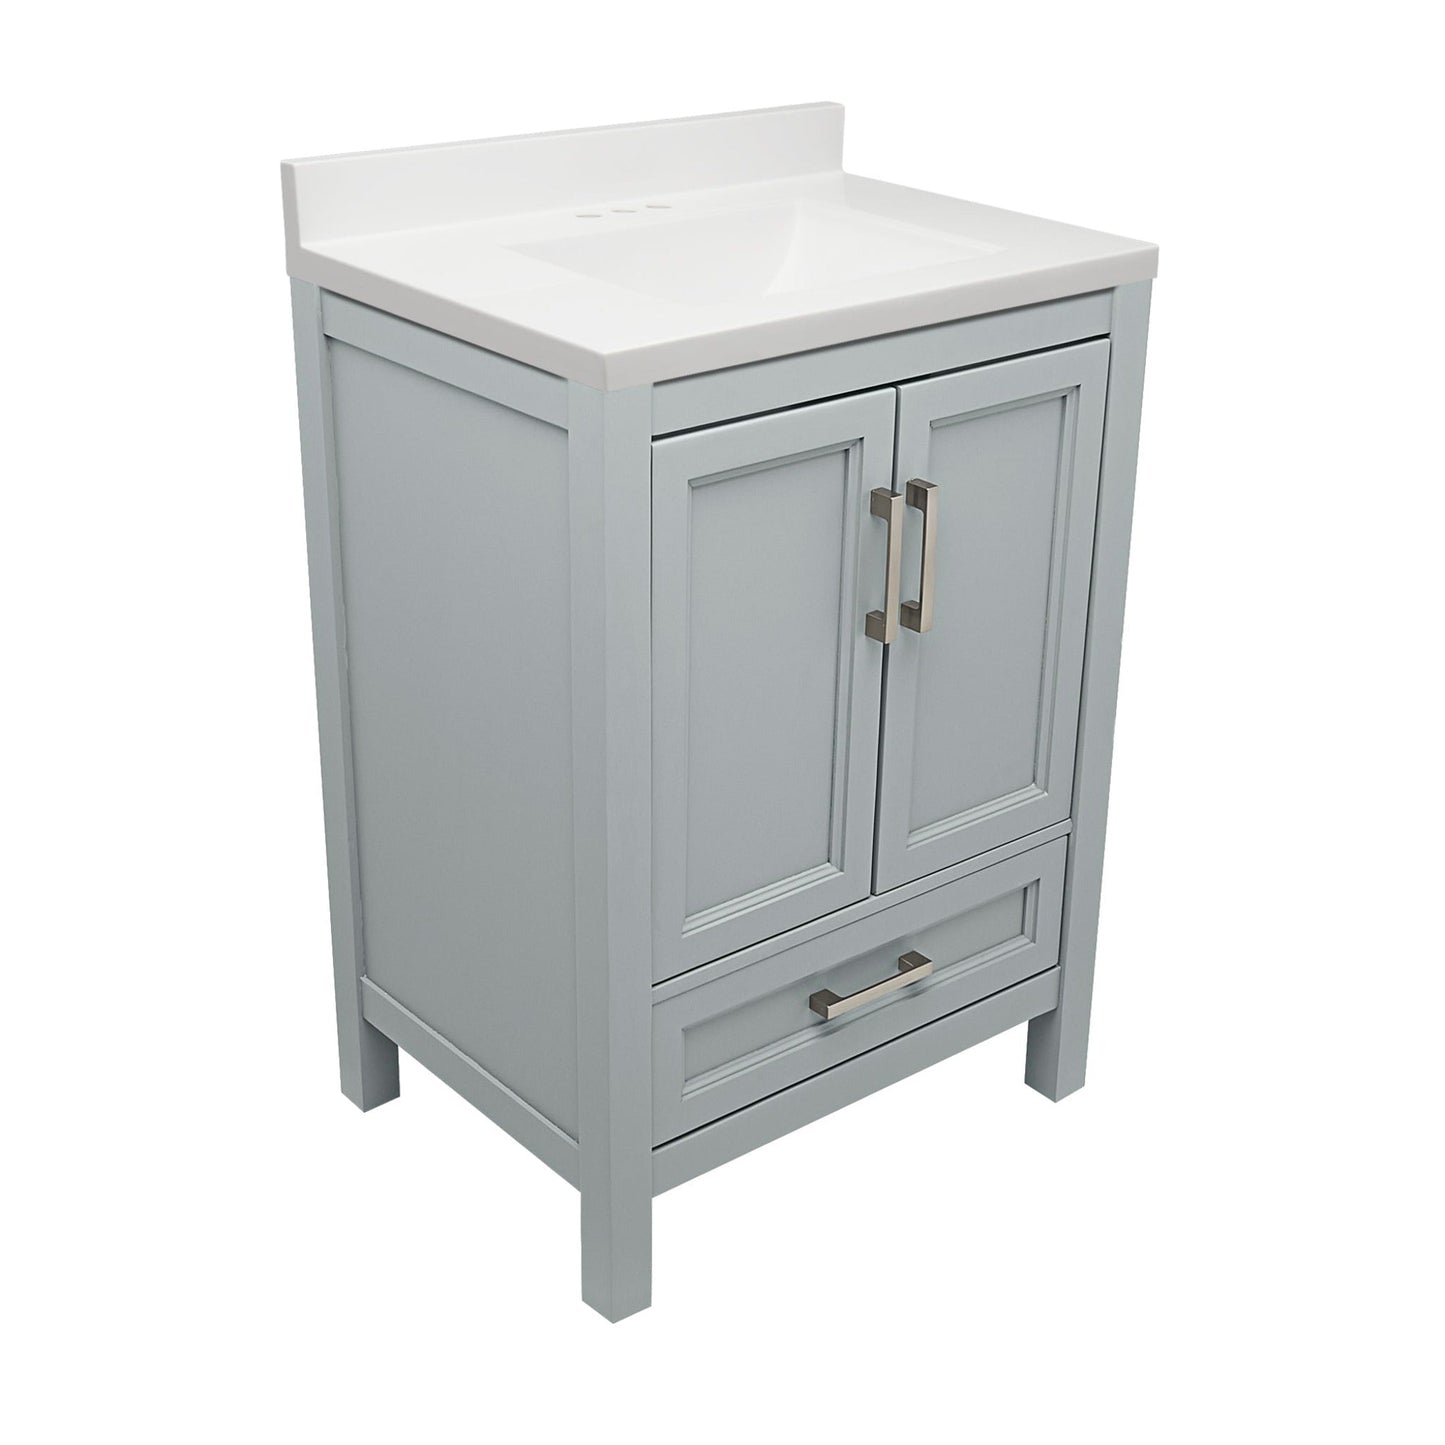 Ella’s Bubbles Nevado 25" Gray Bathroom Vanity With White Cultured Marble Top With White Backsplash and Sink